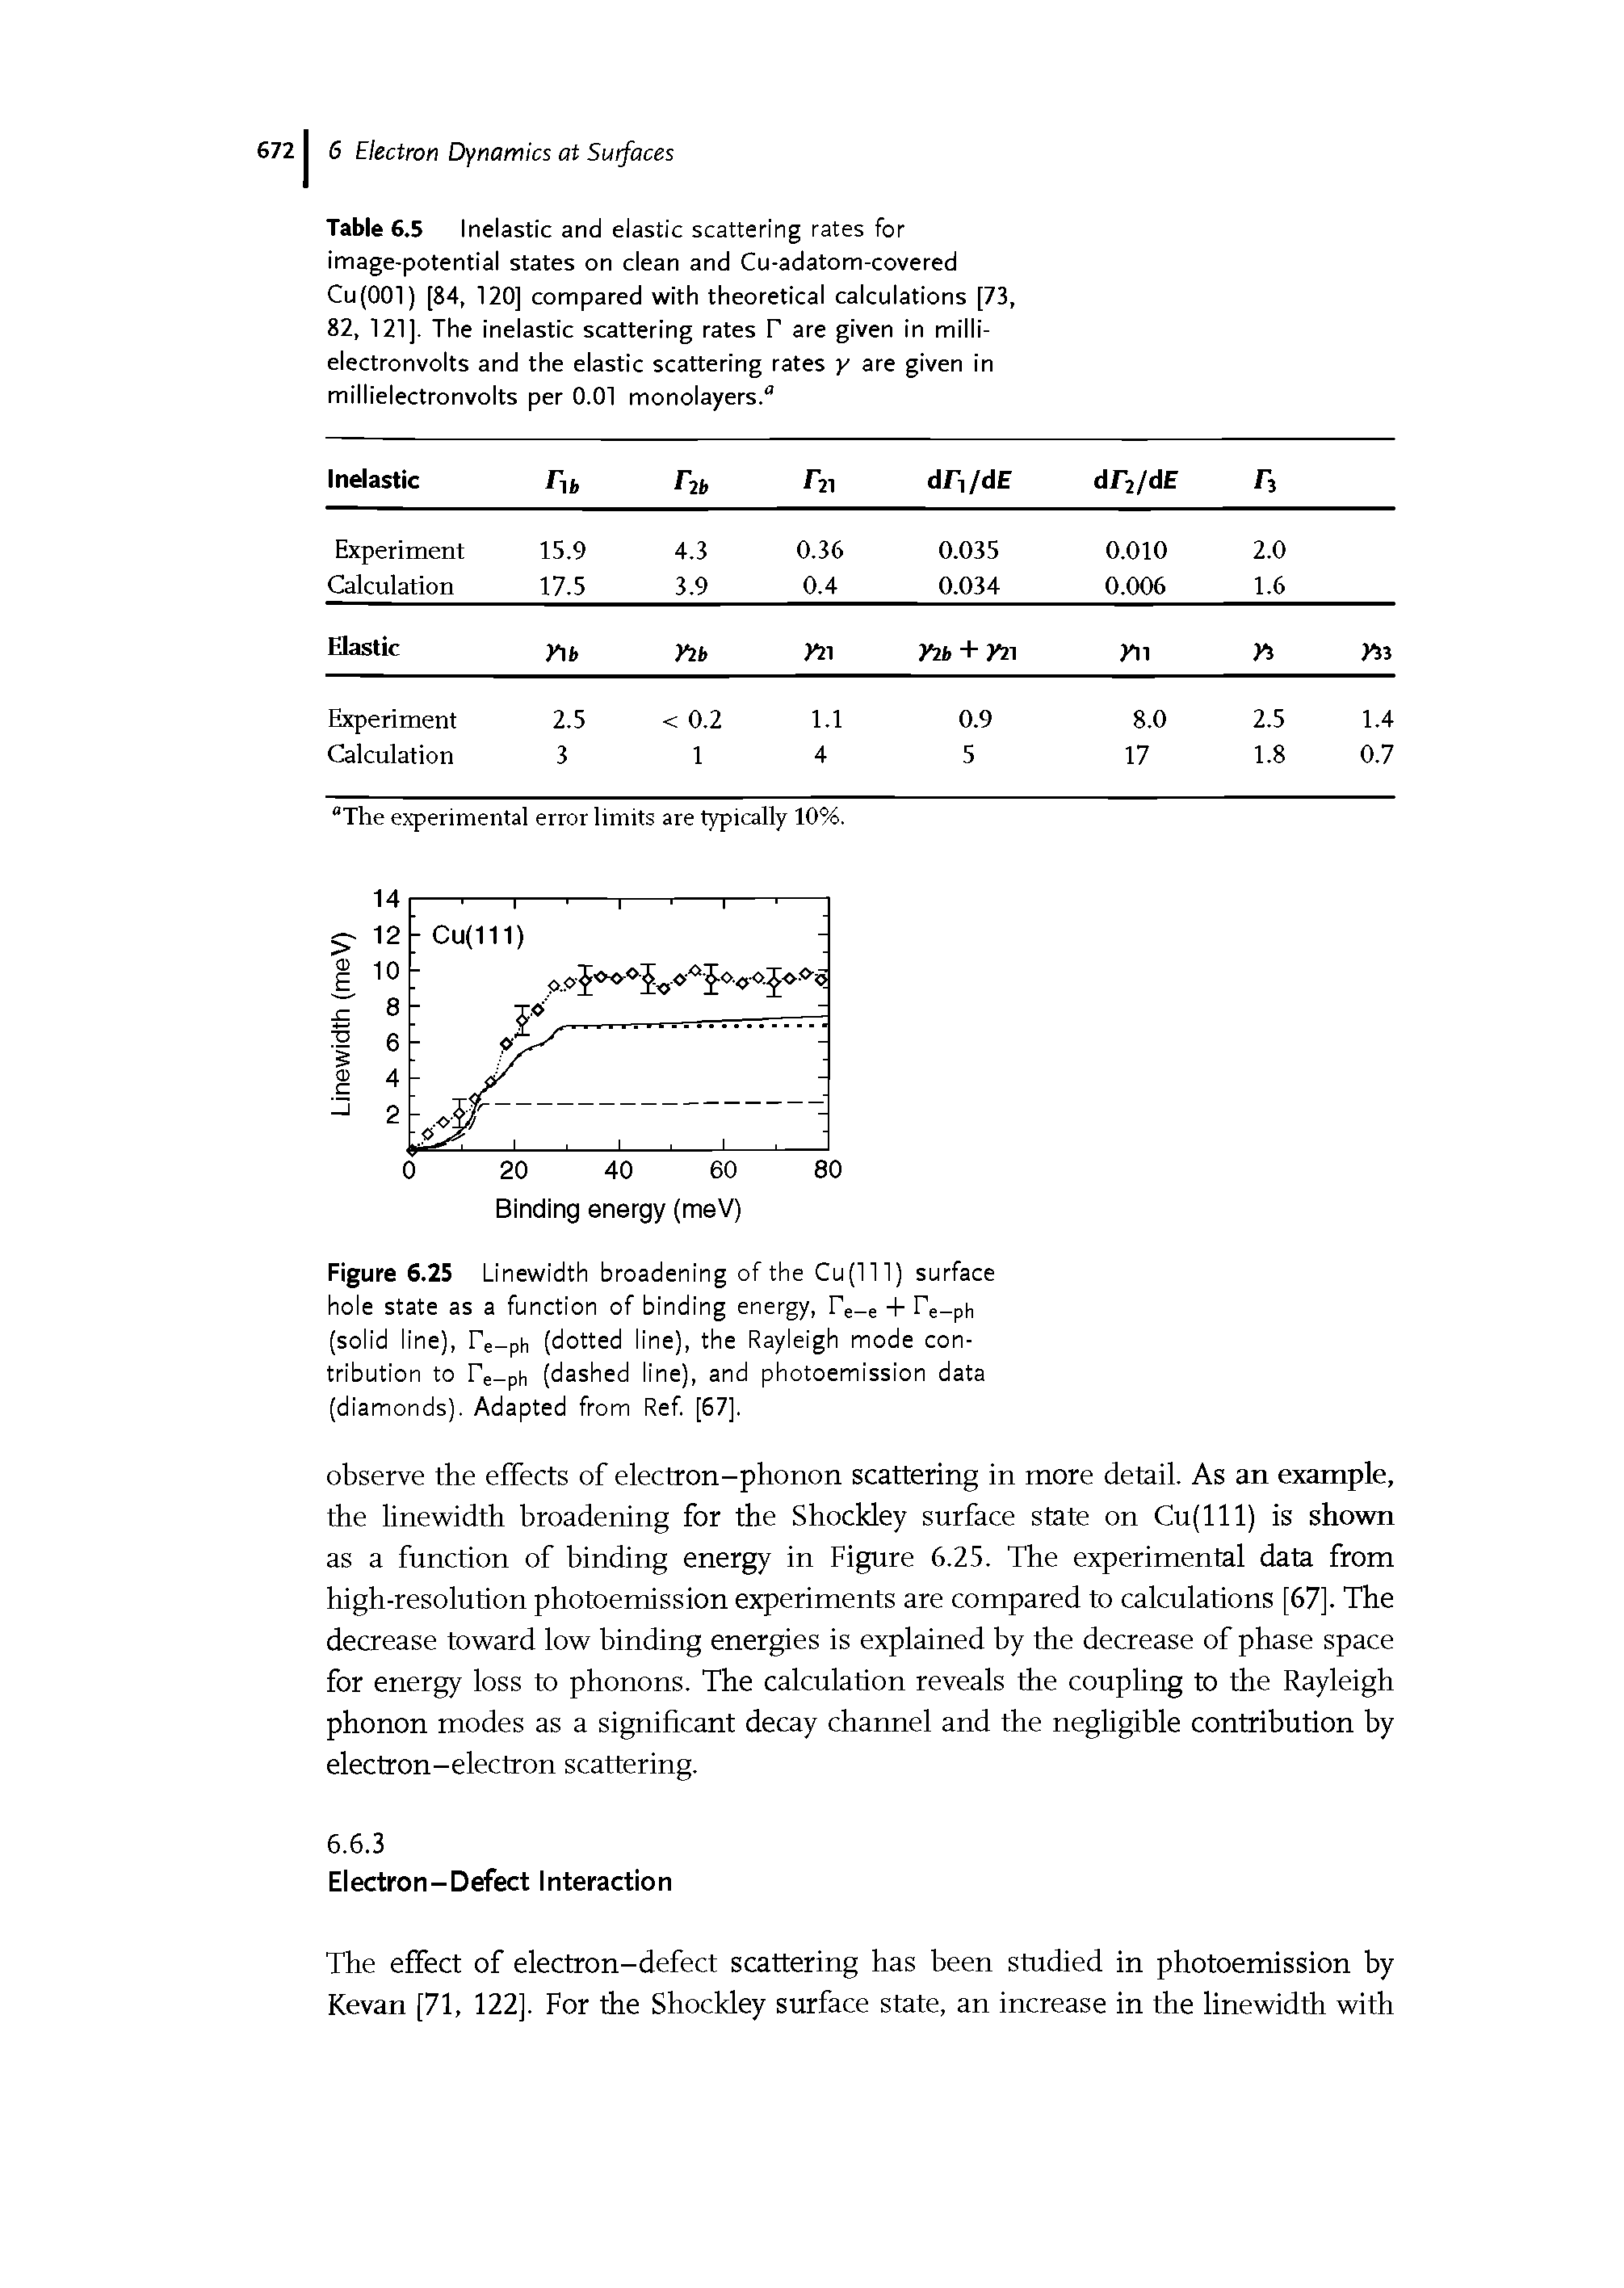 Table 6.5 Inelastic and elastic scattering rates for image-potential states on clean and Cu-adatom-covered Cu(OOl) [84, 120] compared with theoretical calculations [73, 82, 121]. The inelastic scattering rates P are given in milli-electronvolts and the elastic scattering rates y are given in millielectronvolts per 0.01 monolayers."...